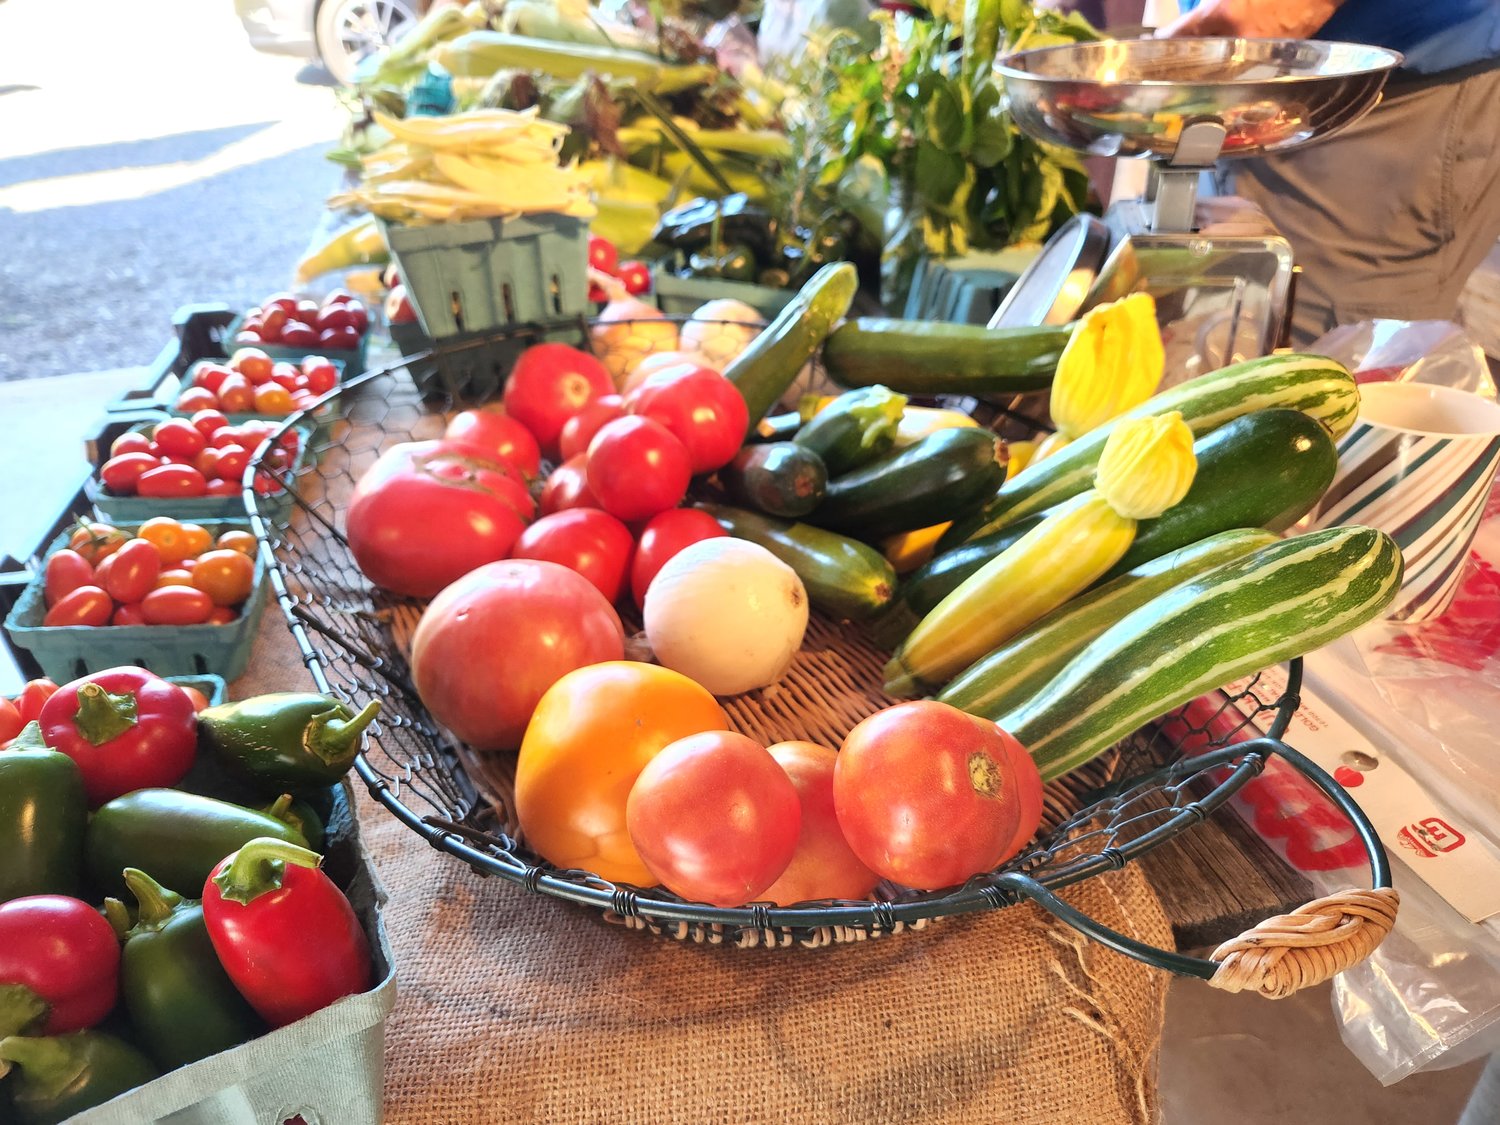 Scott Geiser, a Bucks County Extension horticultural educator, created this attractive display of local produce at last Saturday’s Plumsteadville Grange Farmers Market.